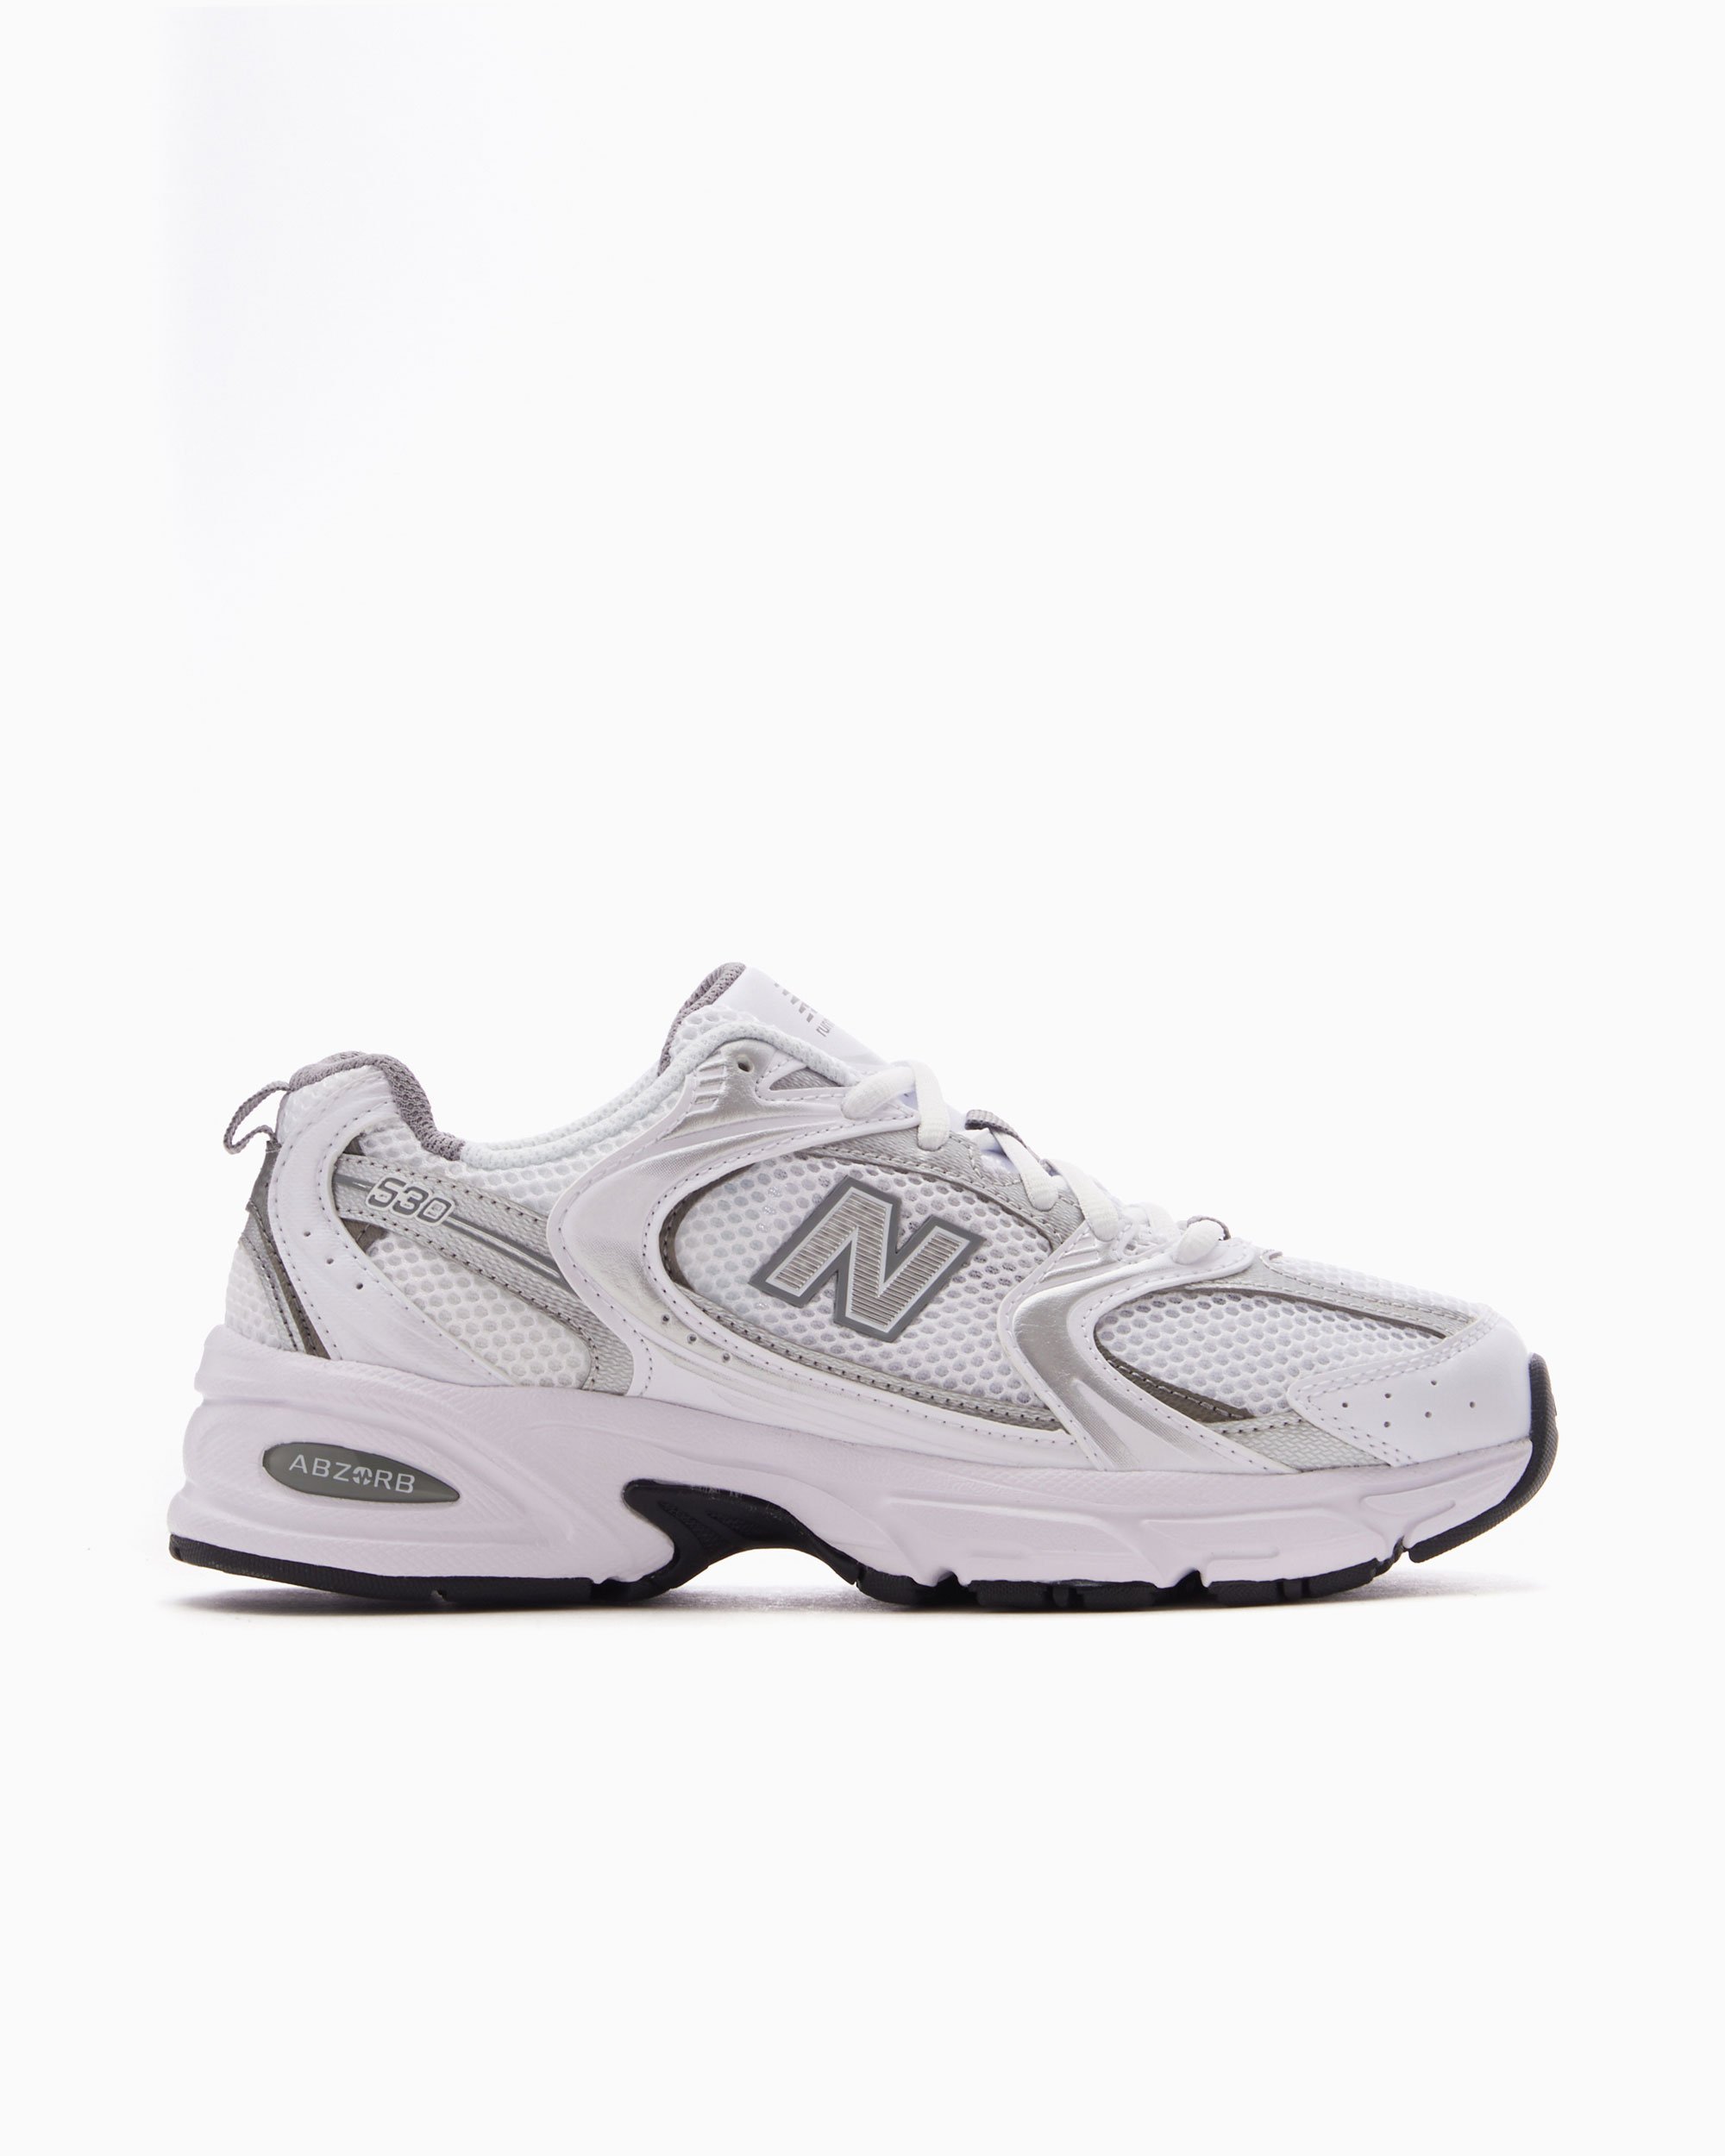 New Balance MR530 AD White MR530AD| Buy Online at FOOTDISTRICT